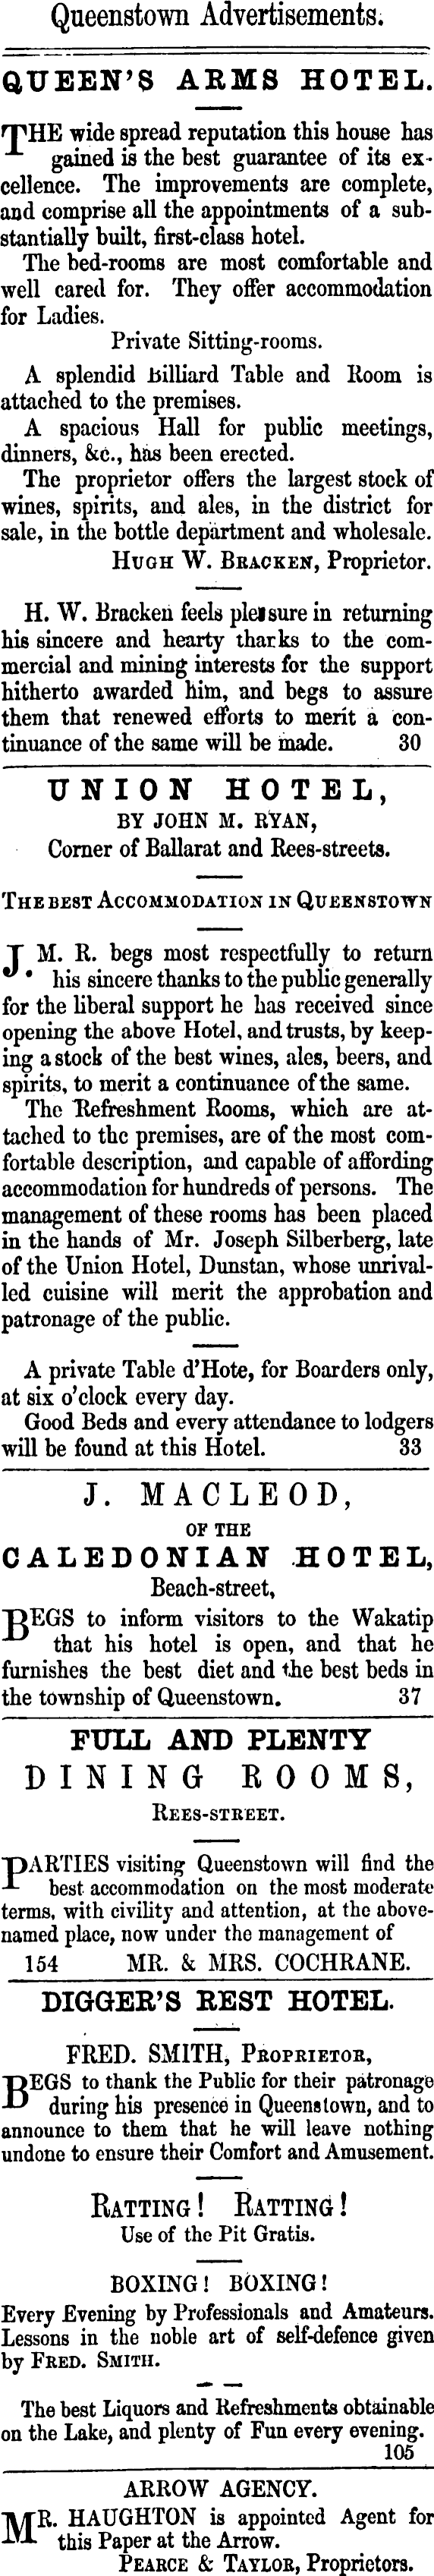 Papers Past Newspapers Lake Wakatip Mail 24 June 1863 Page 1 Advertisements Column 3